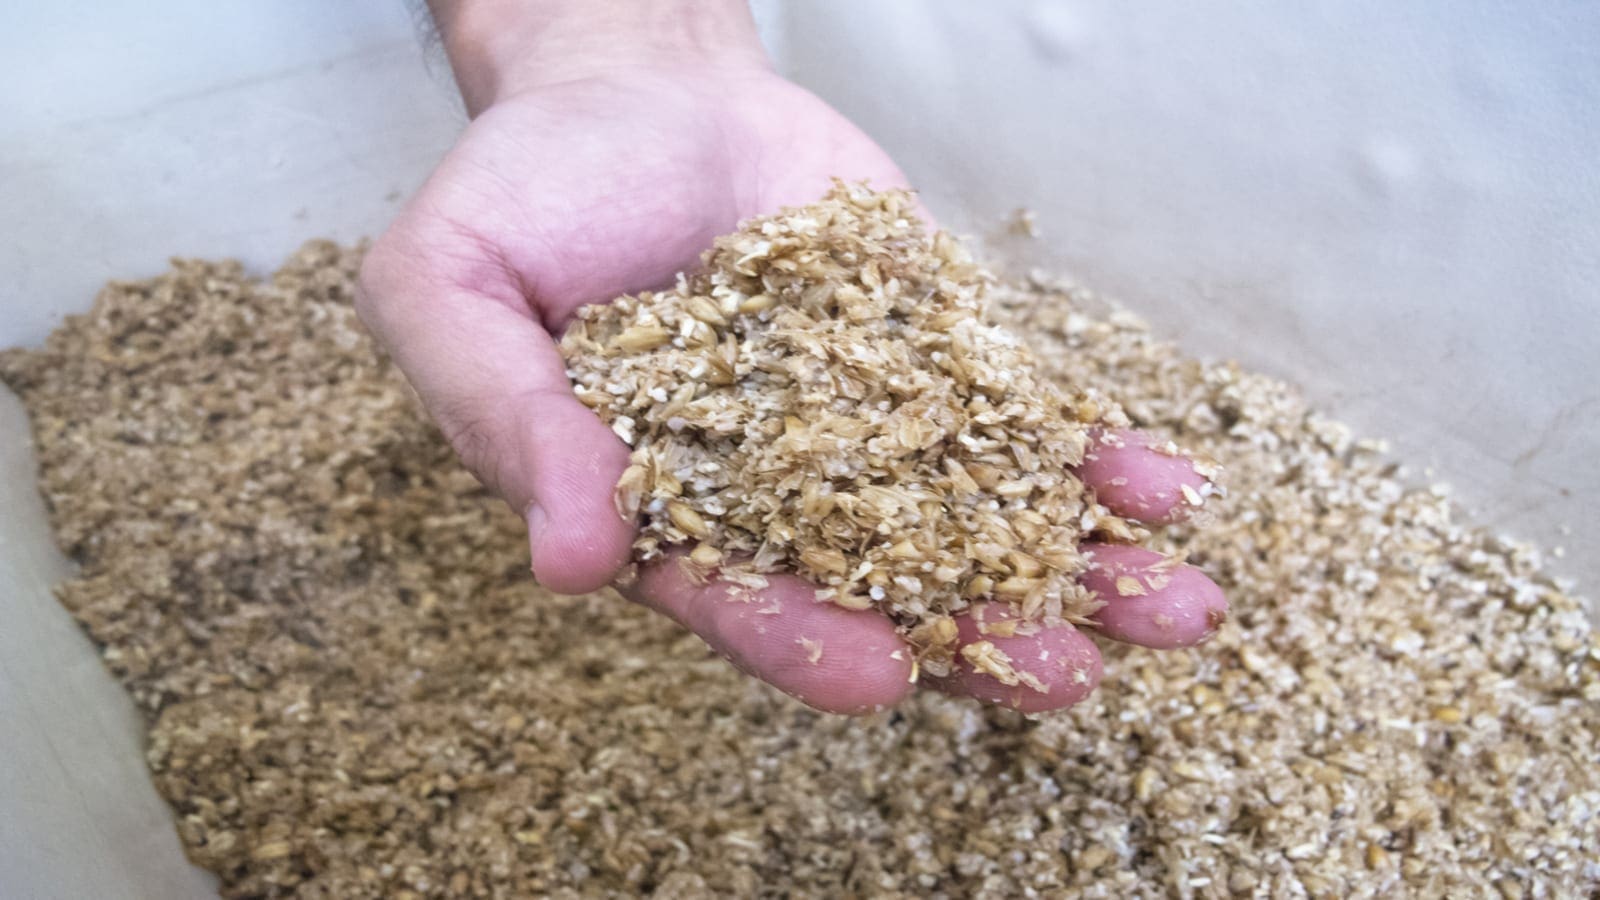 Newly launched startup EverGrain to convert AB InBev’s barley waste into plant-based protein